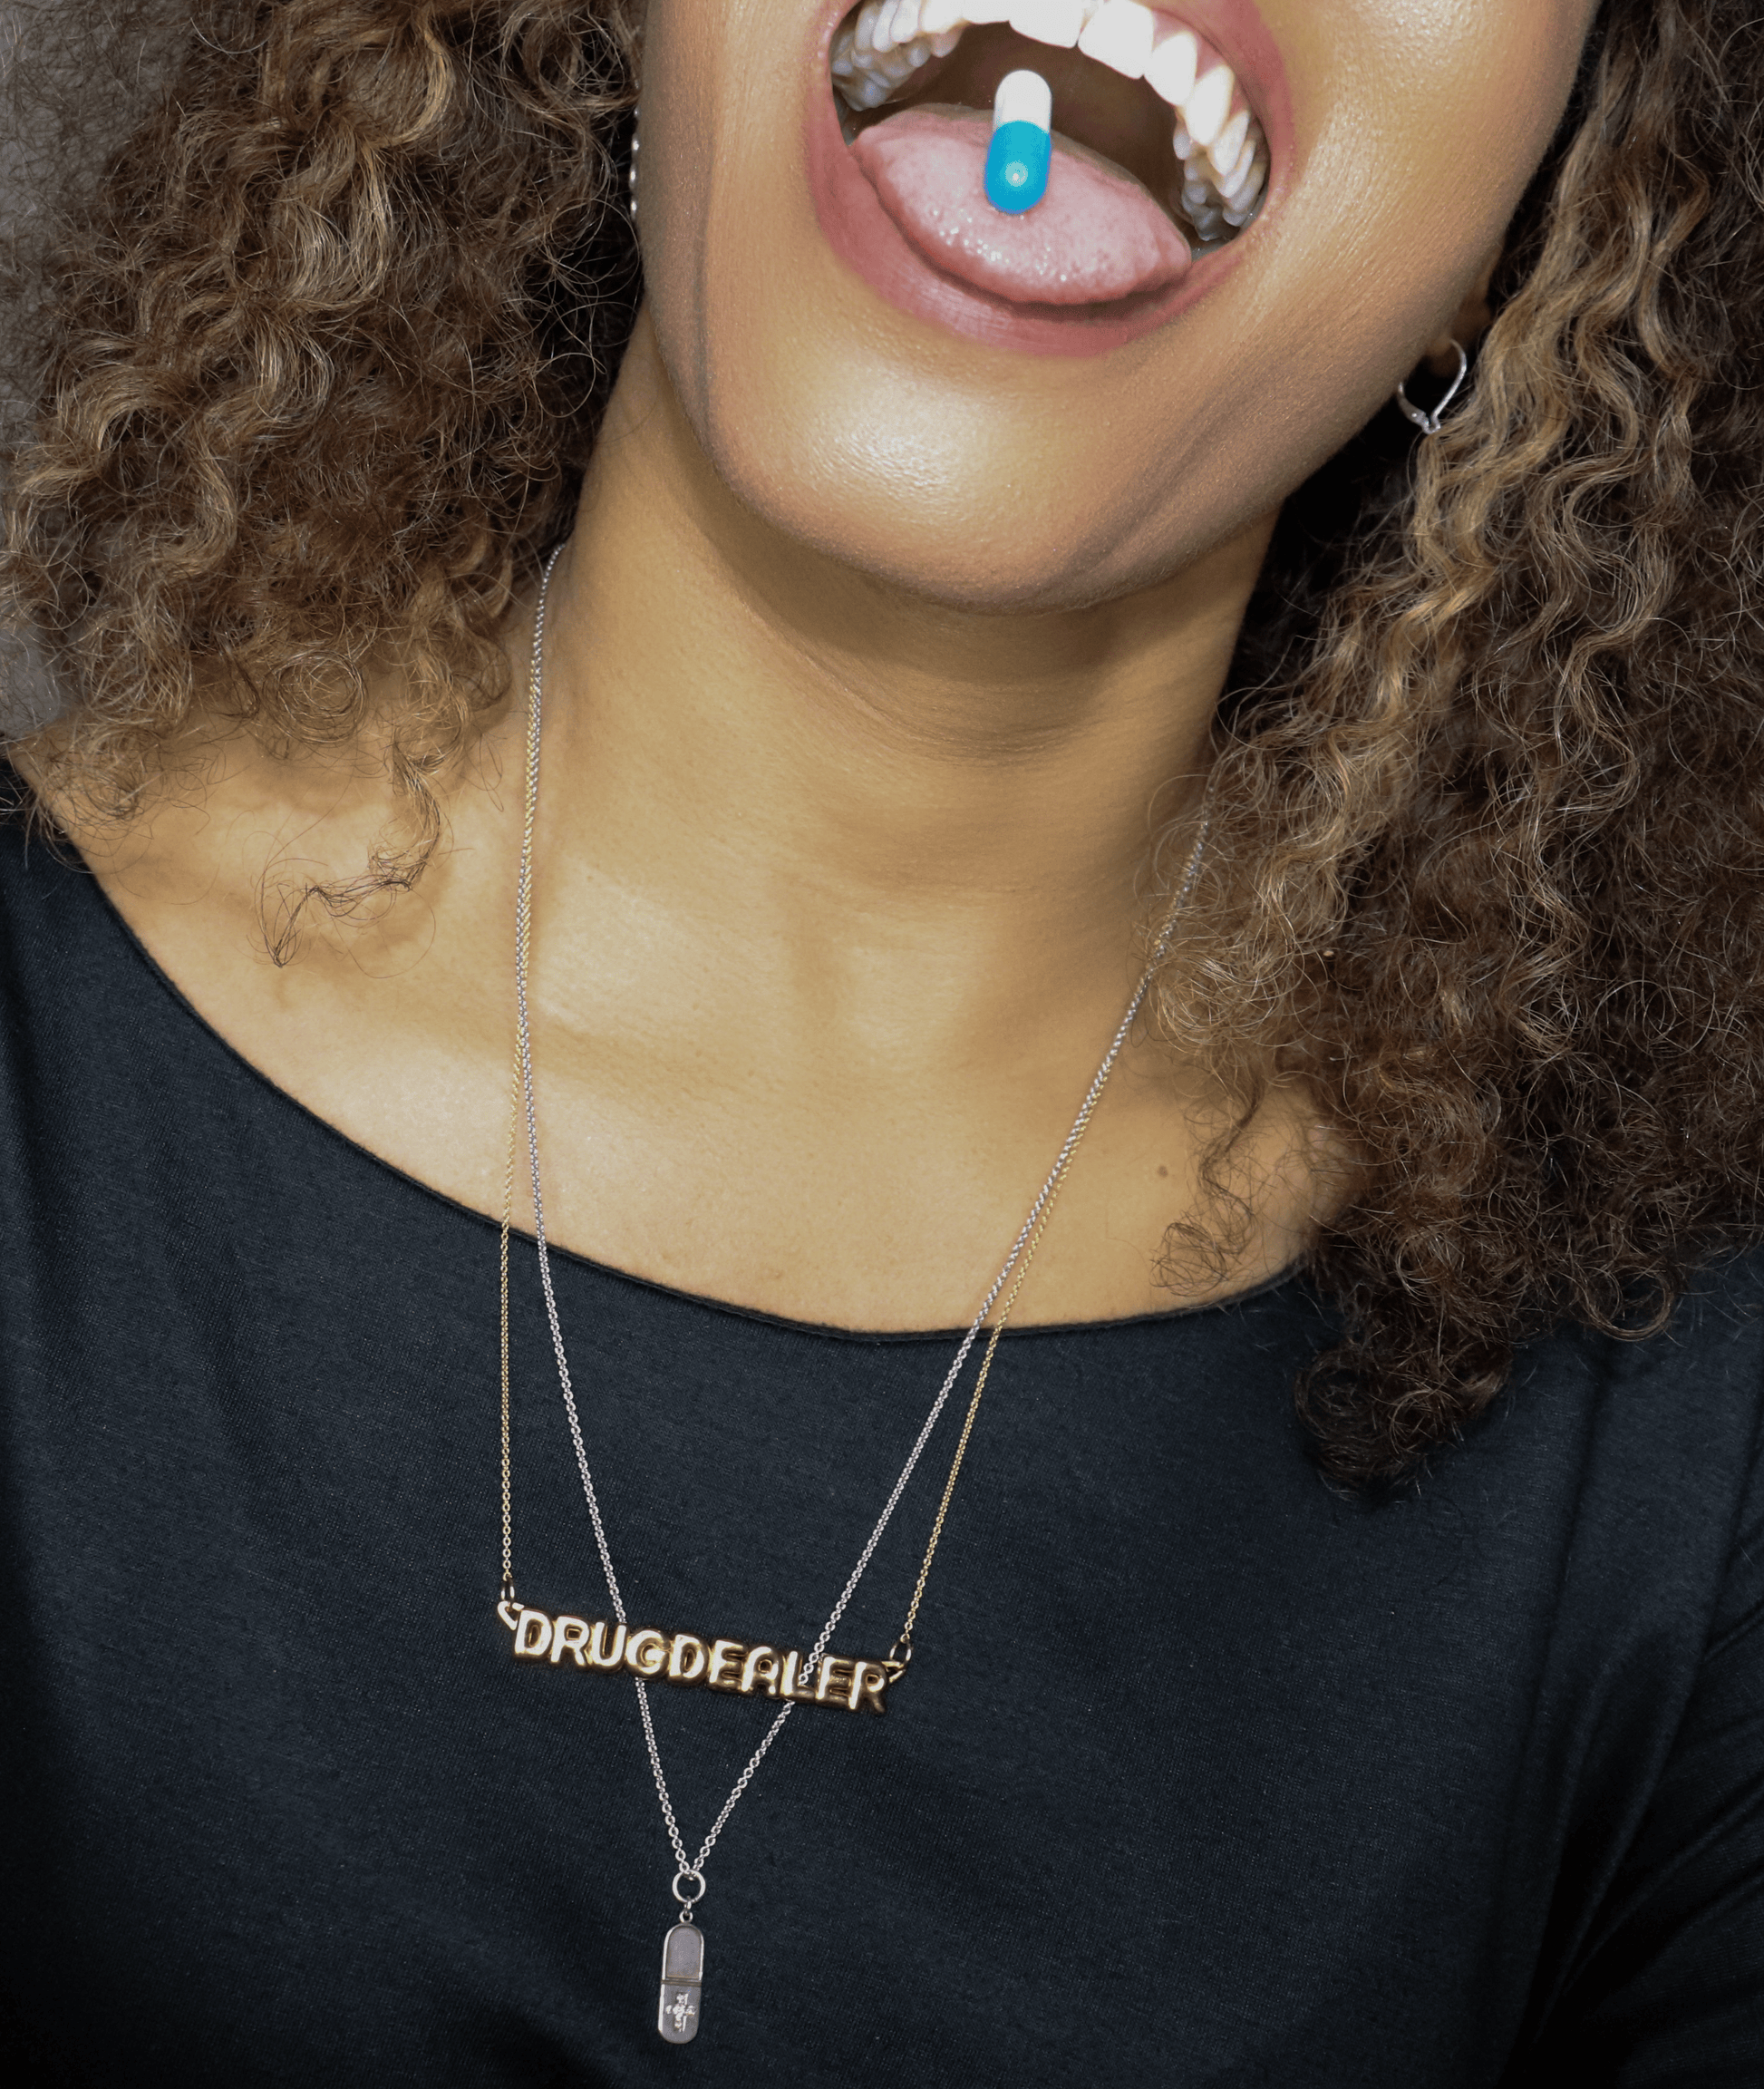 woman with pill in her mouth wearing drug dealer nameplate pendant necklace